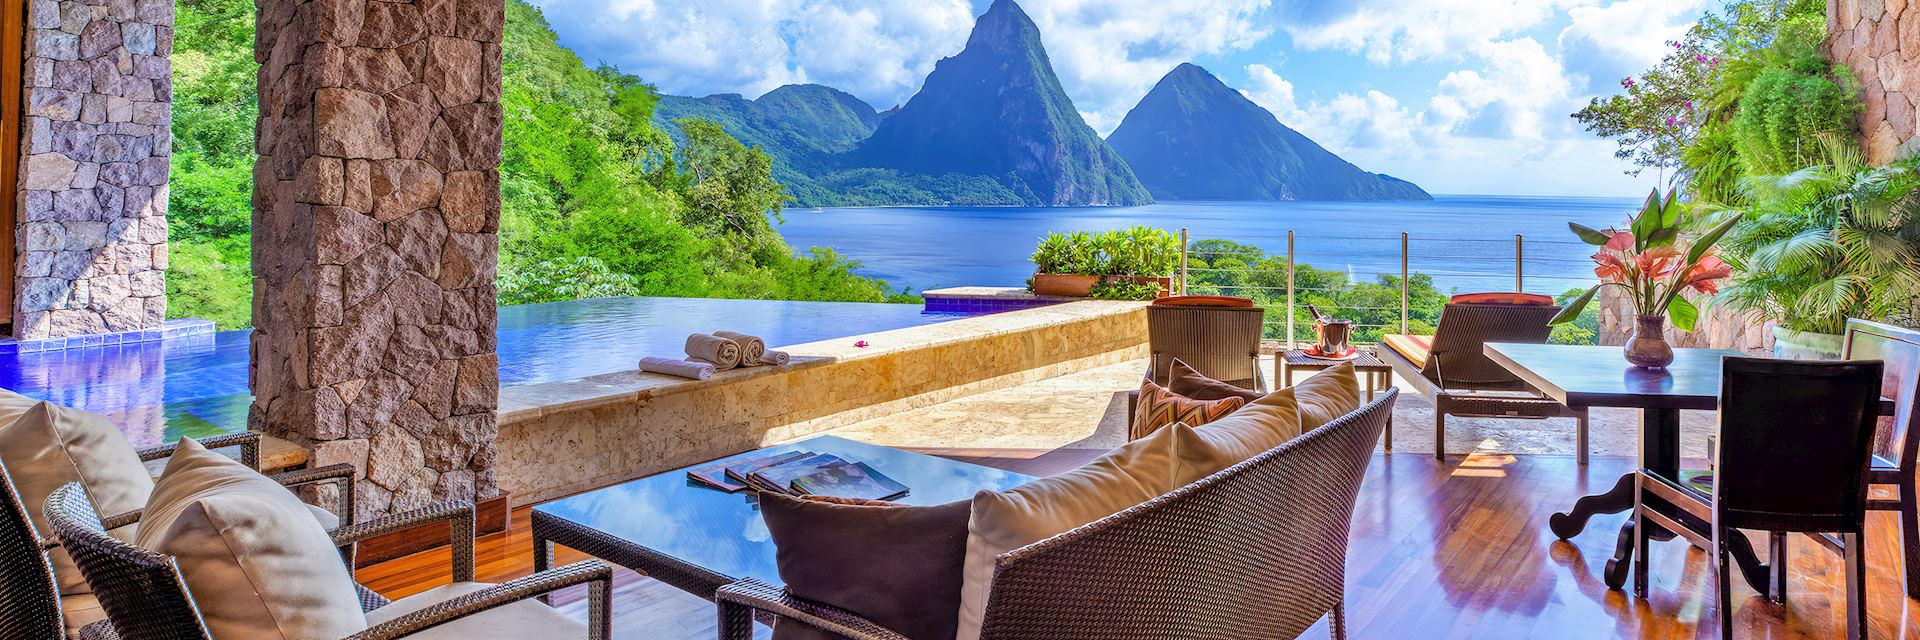 https://media.audleytravel.com/-/media/images/home/caribbean/st-lucia/accommodation/hd-hero-images/jade_mountain_15998092_3000x1000.jpg?q=79&w=1920&h=640